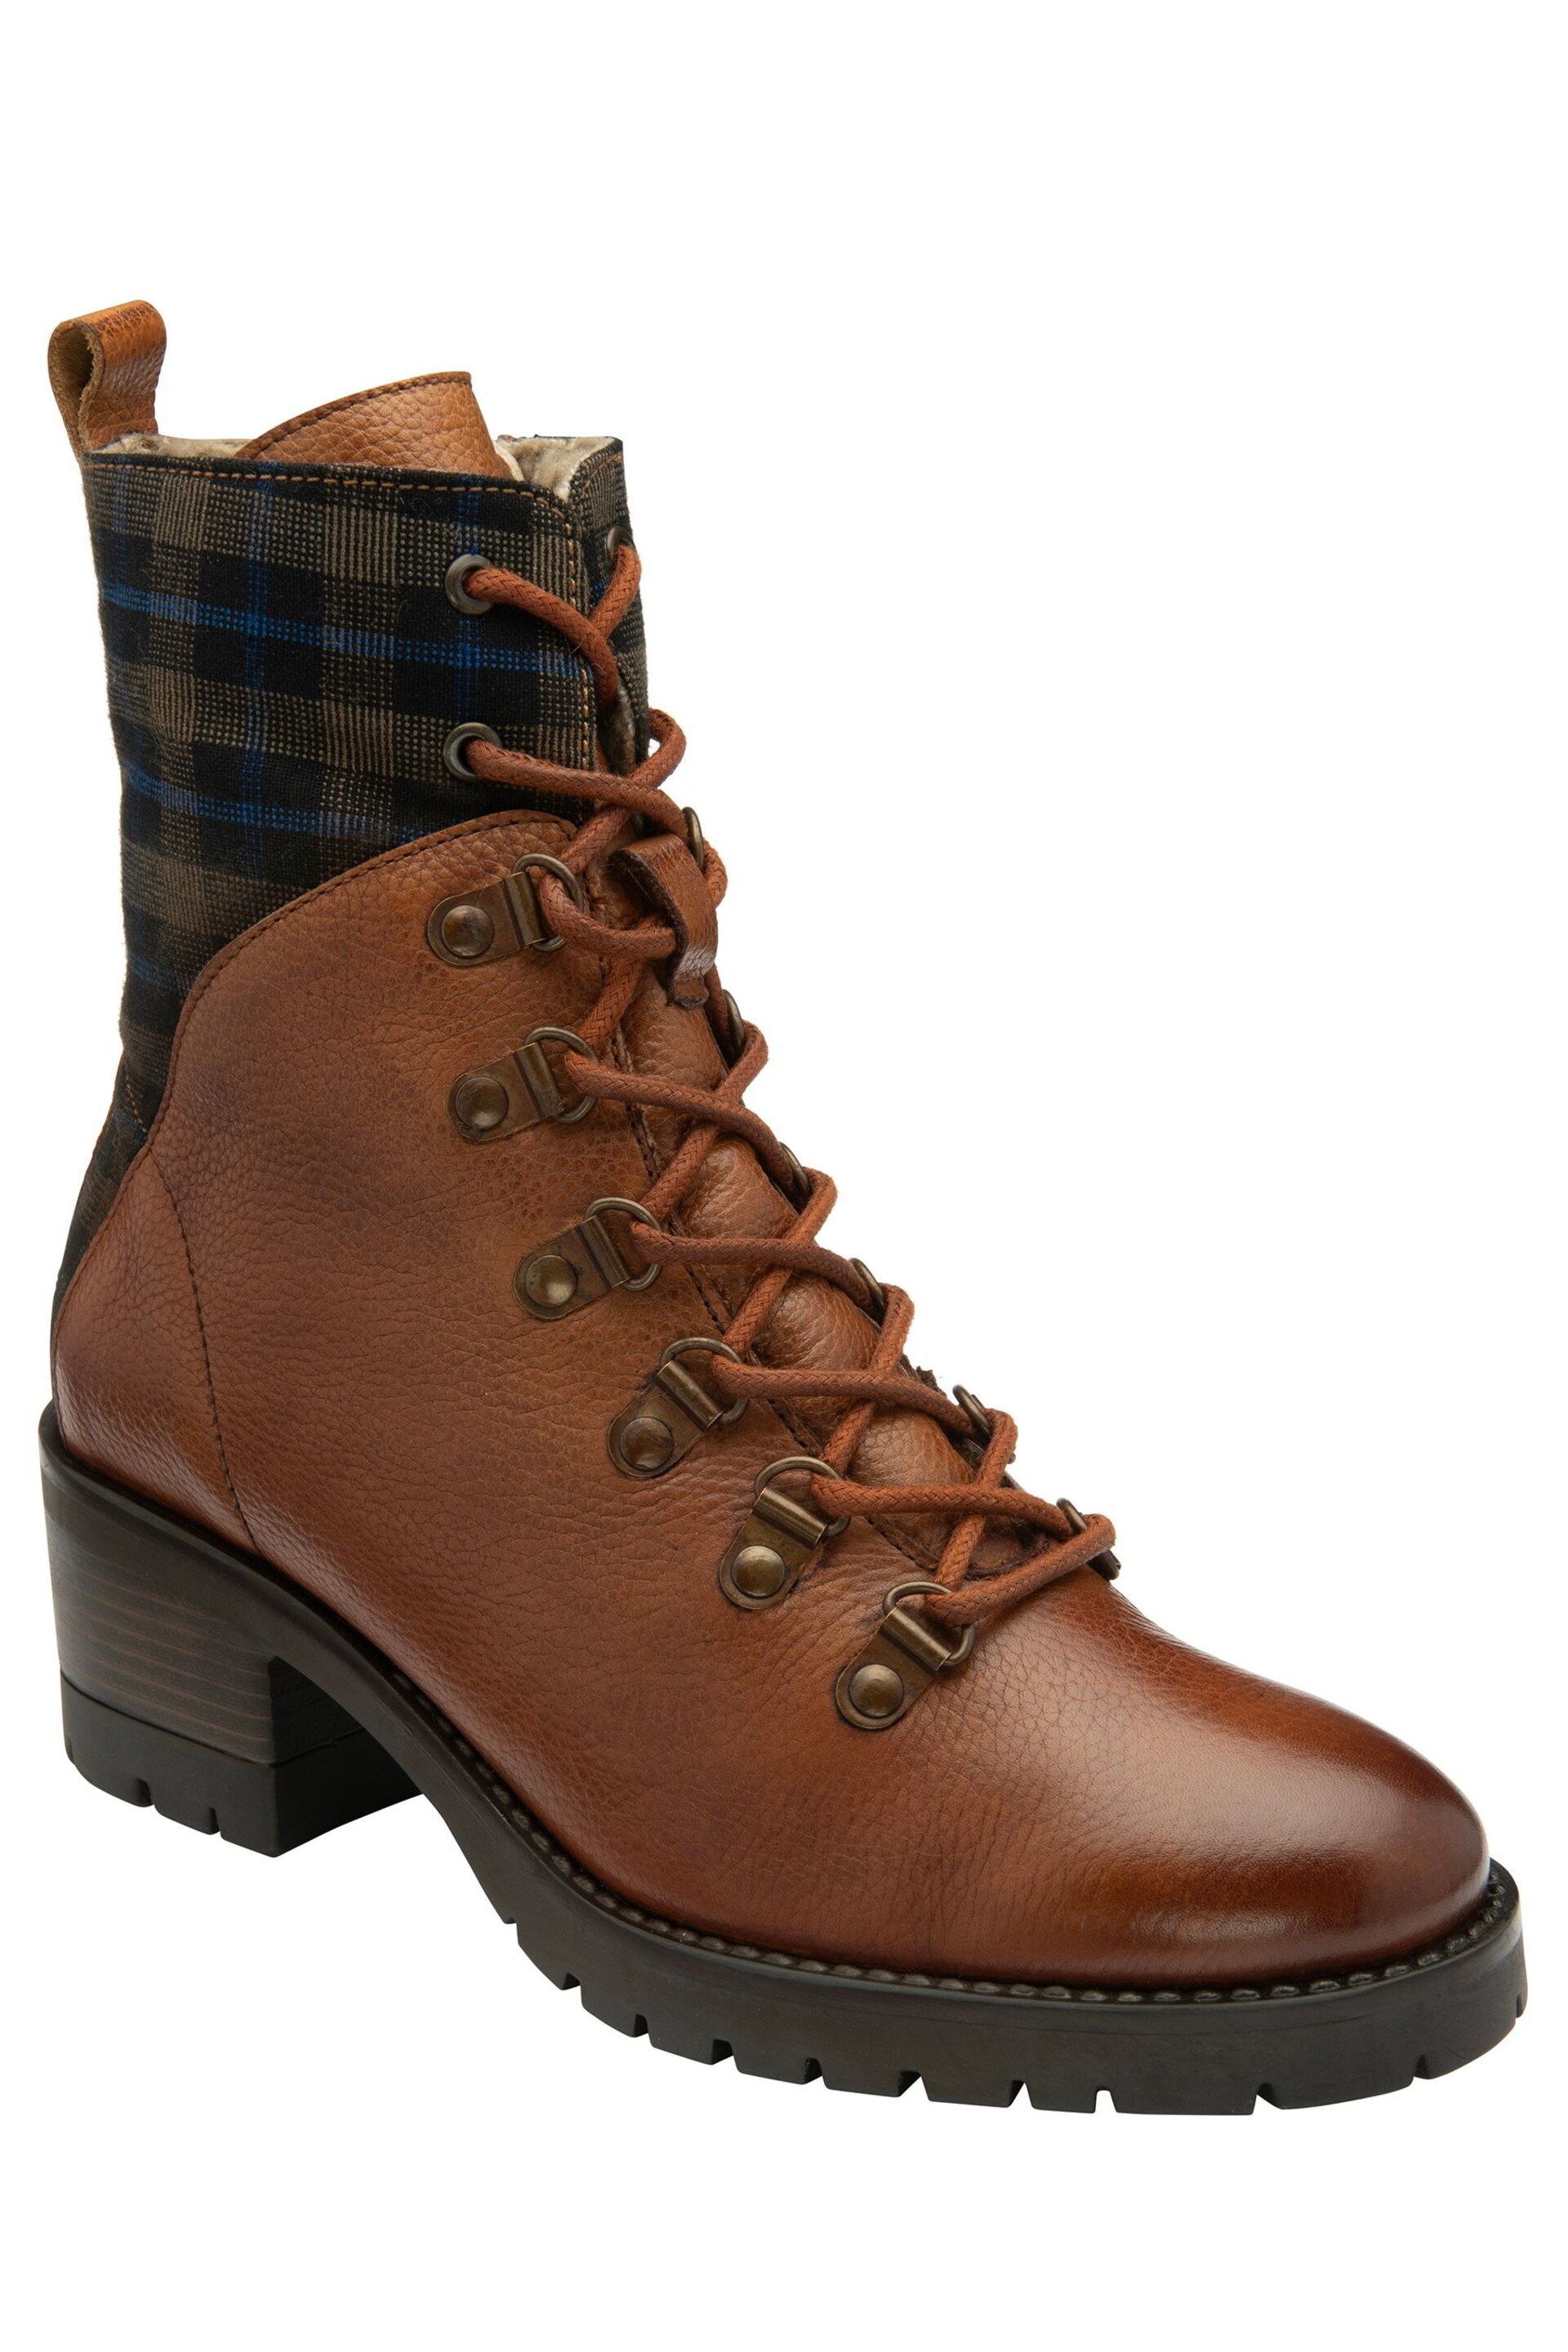 Lotus Brown Leather & Check-Print Zip-Up Ankle Boots - Image 1 of 4